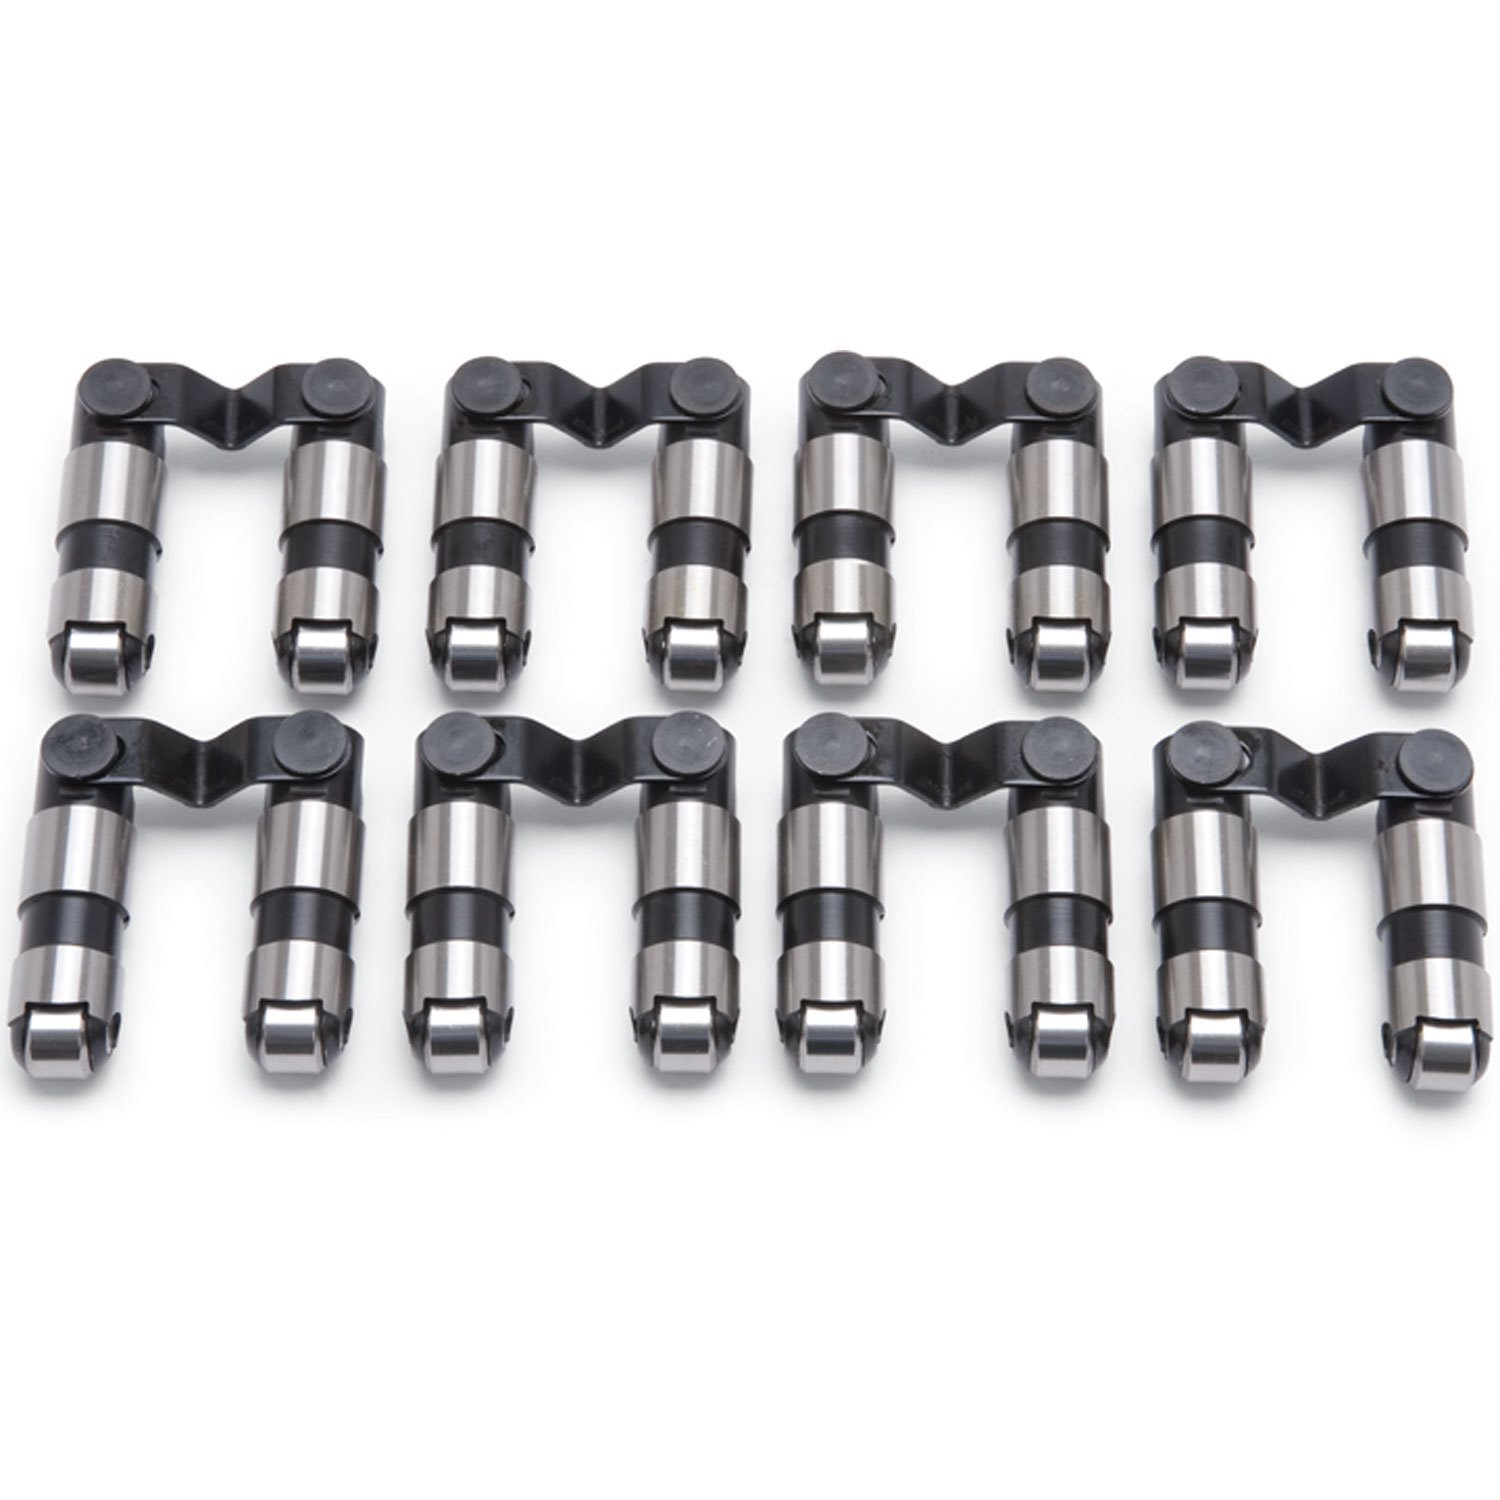 Retro-fit Hydraulic Roller Lifters for Small Block Chrysler 318-360